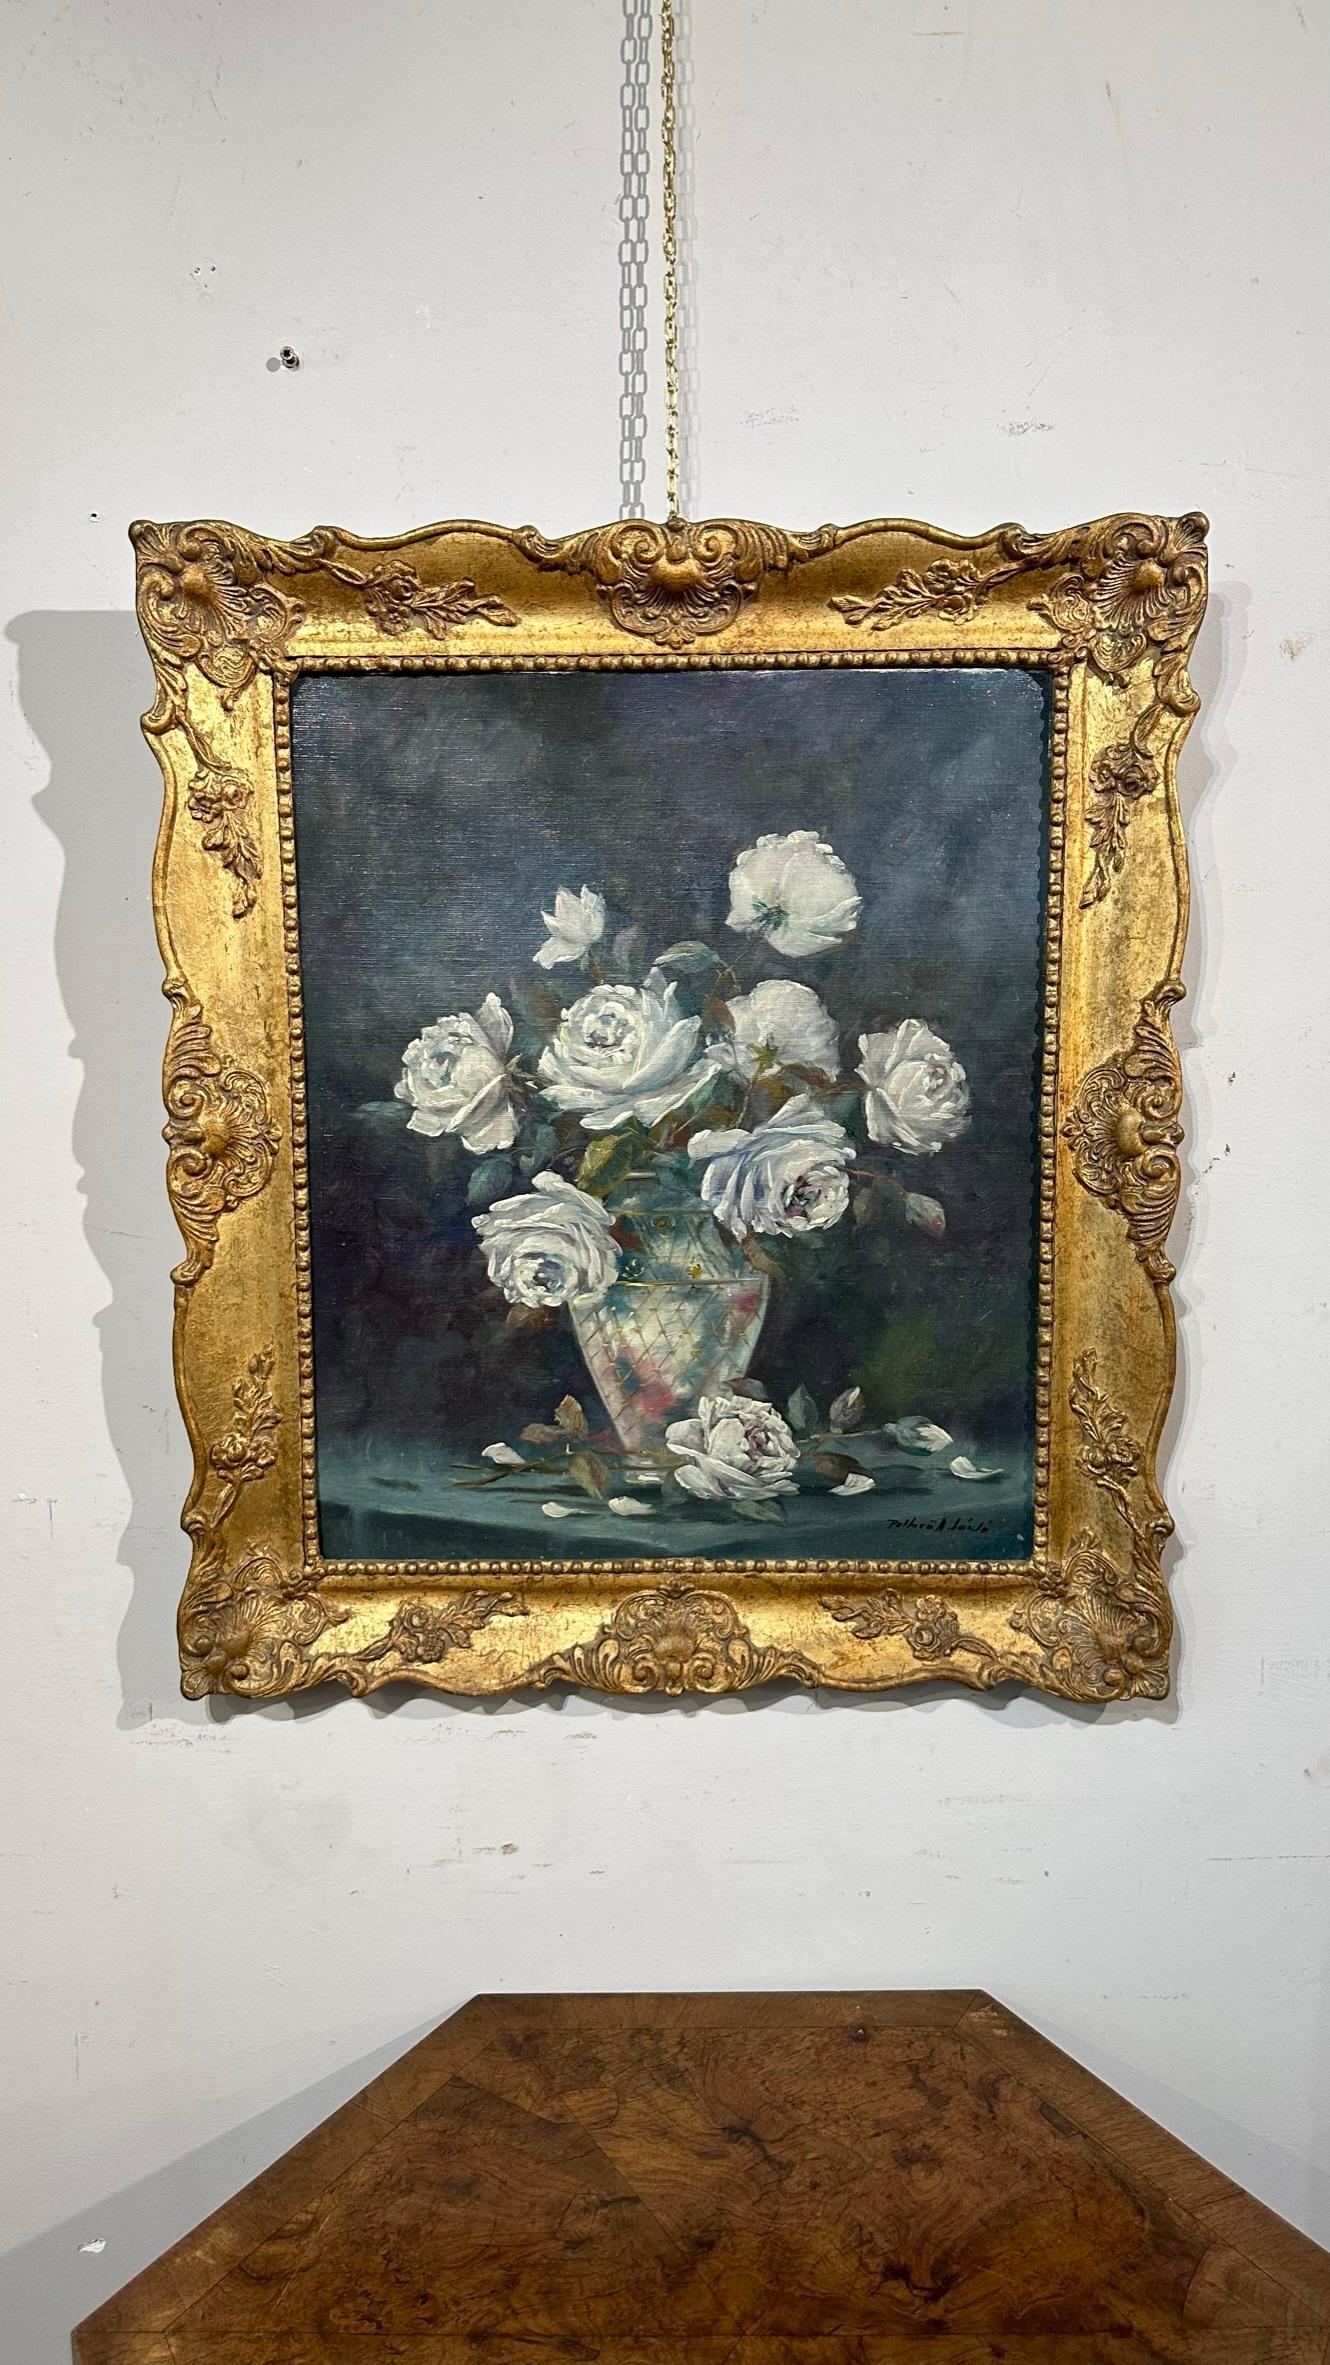 Beautiful oil painting on canvas depicting flowers in a glass vase with gold highlights.
Within a wooden frame and gilt pastille

MEASURES: overall 76x65, work 60x50 cm